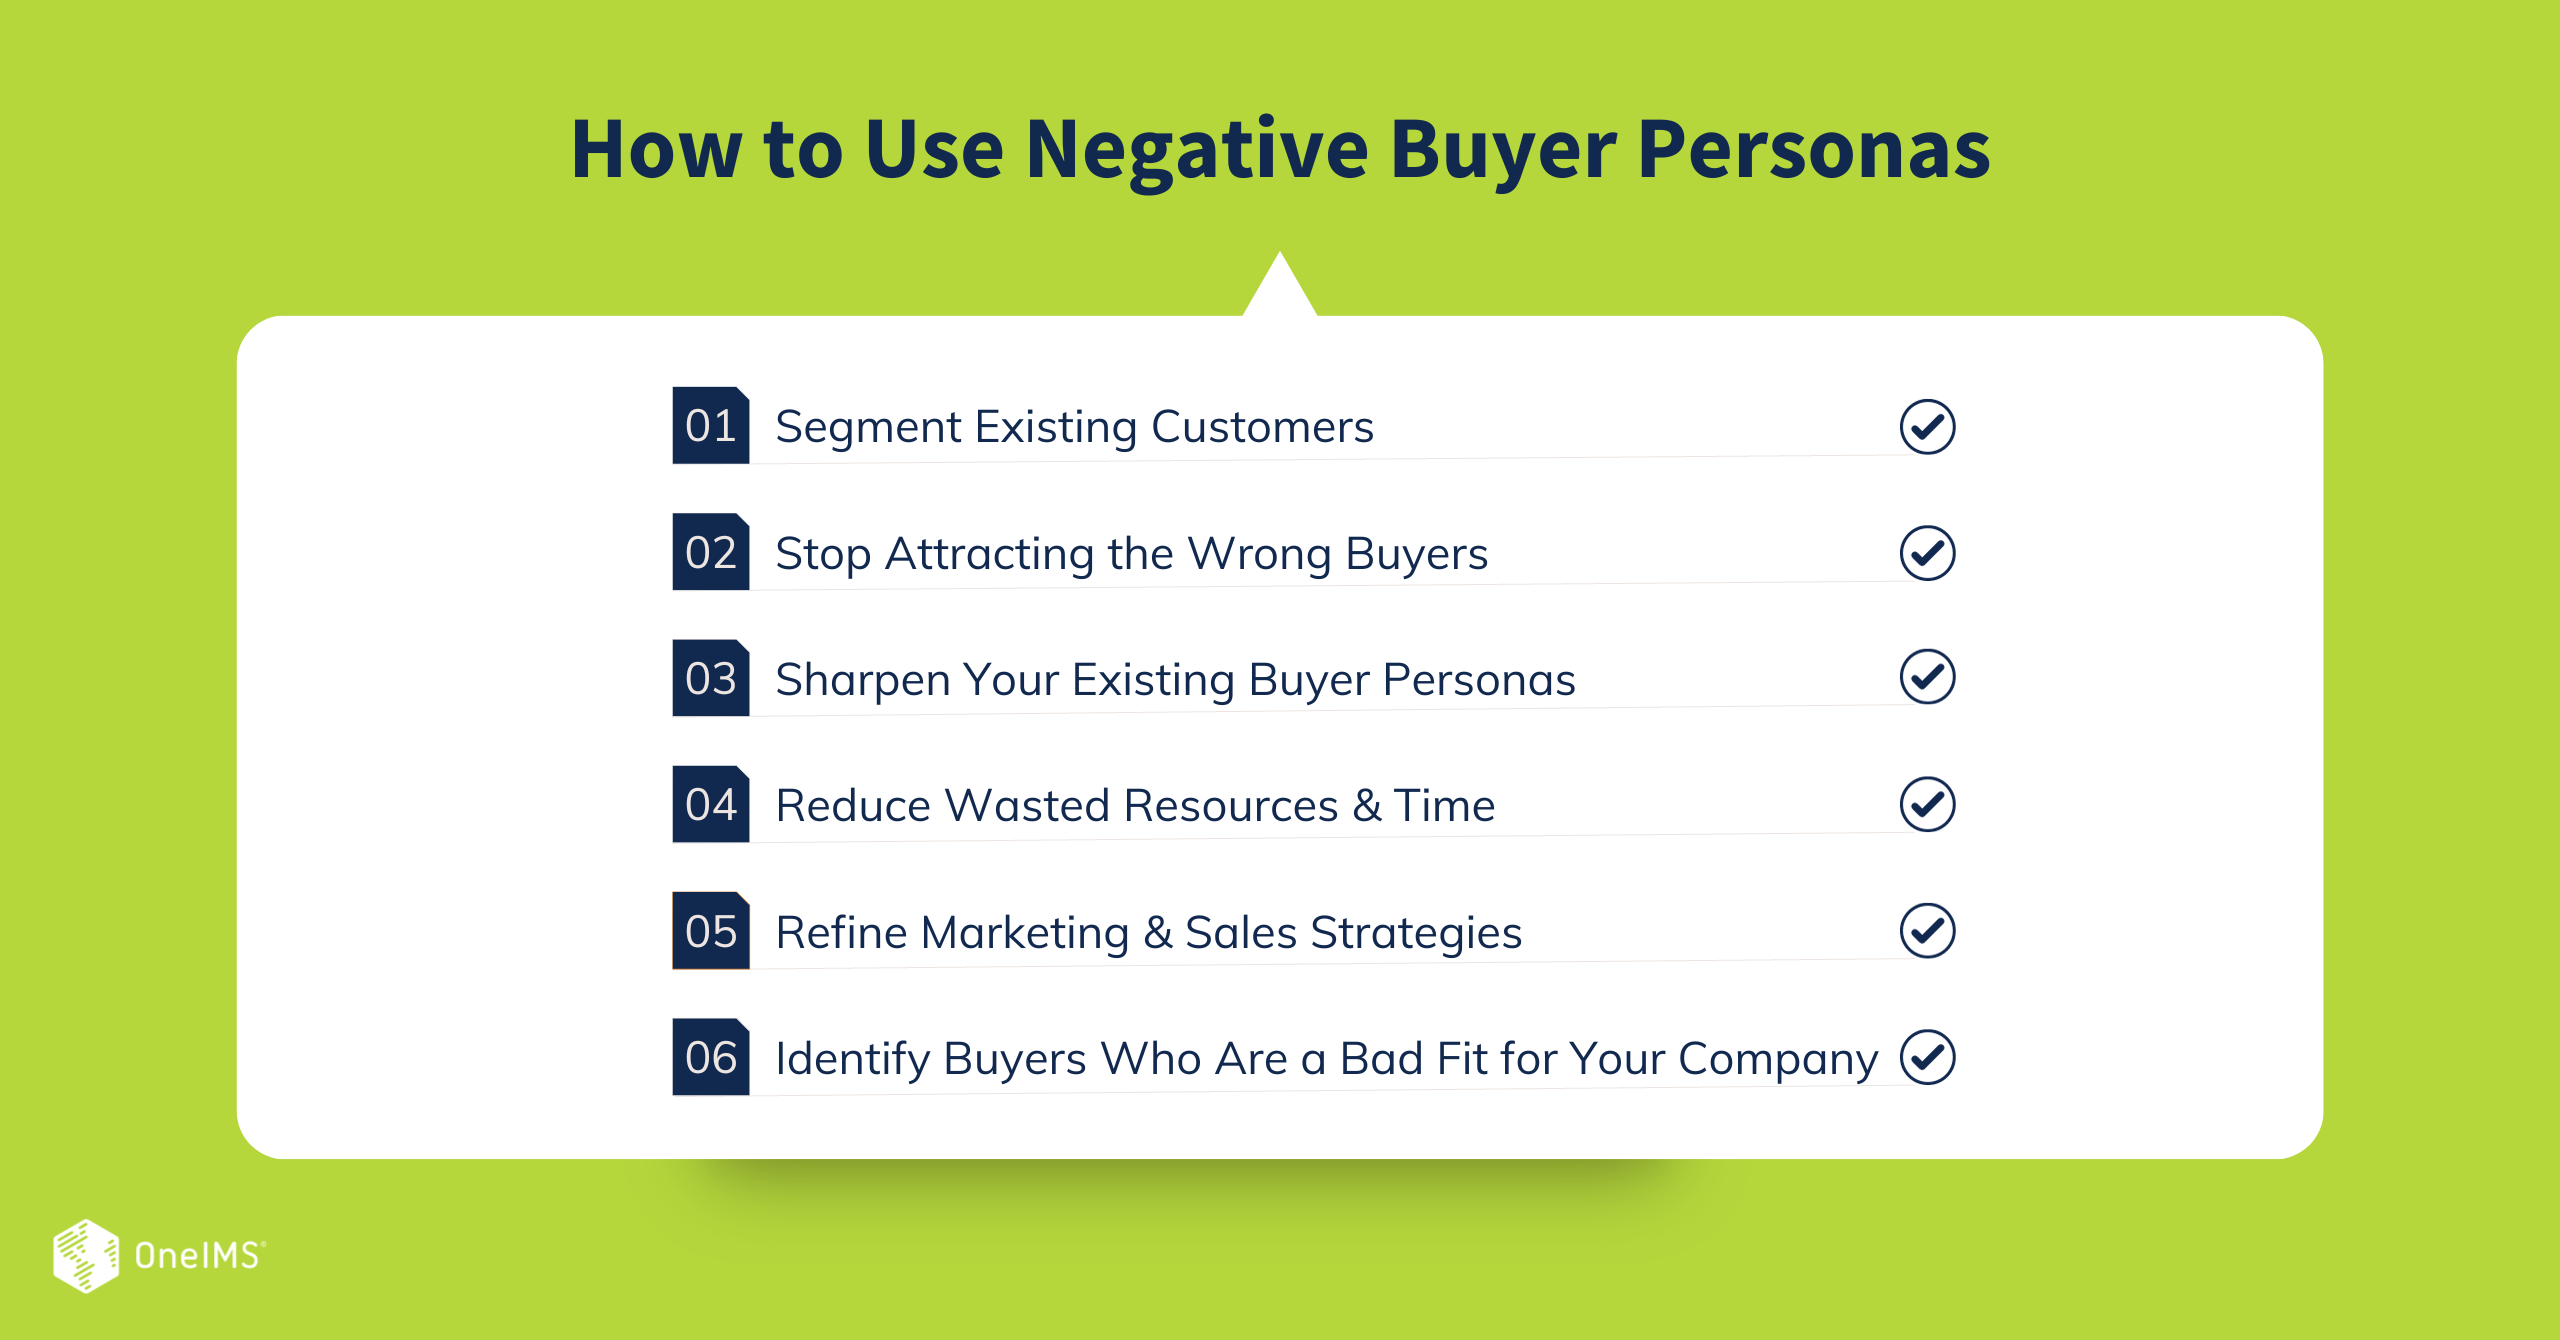 How to Use Negative Buyer Personas